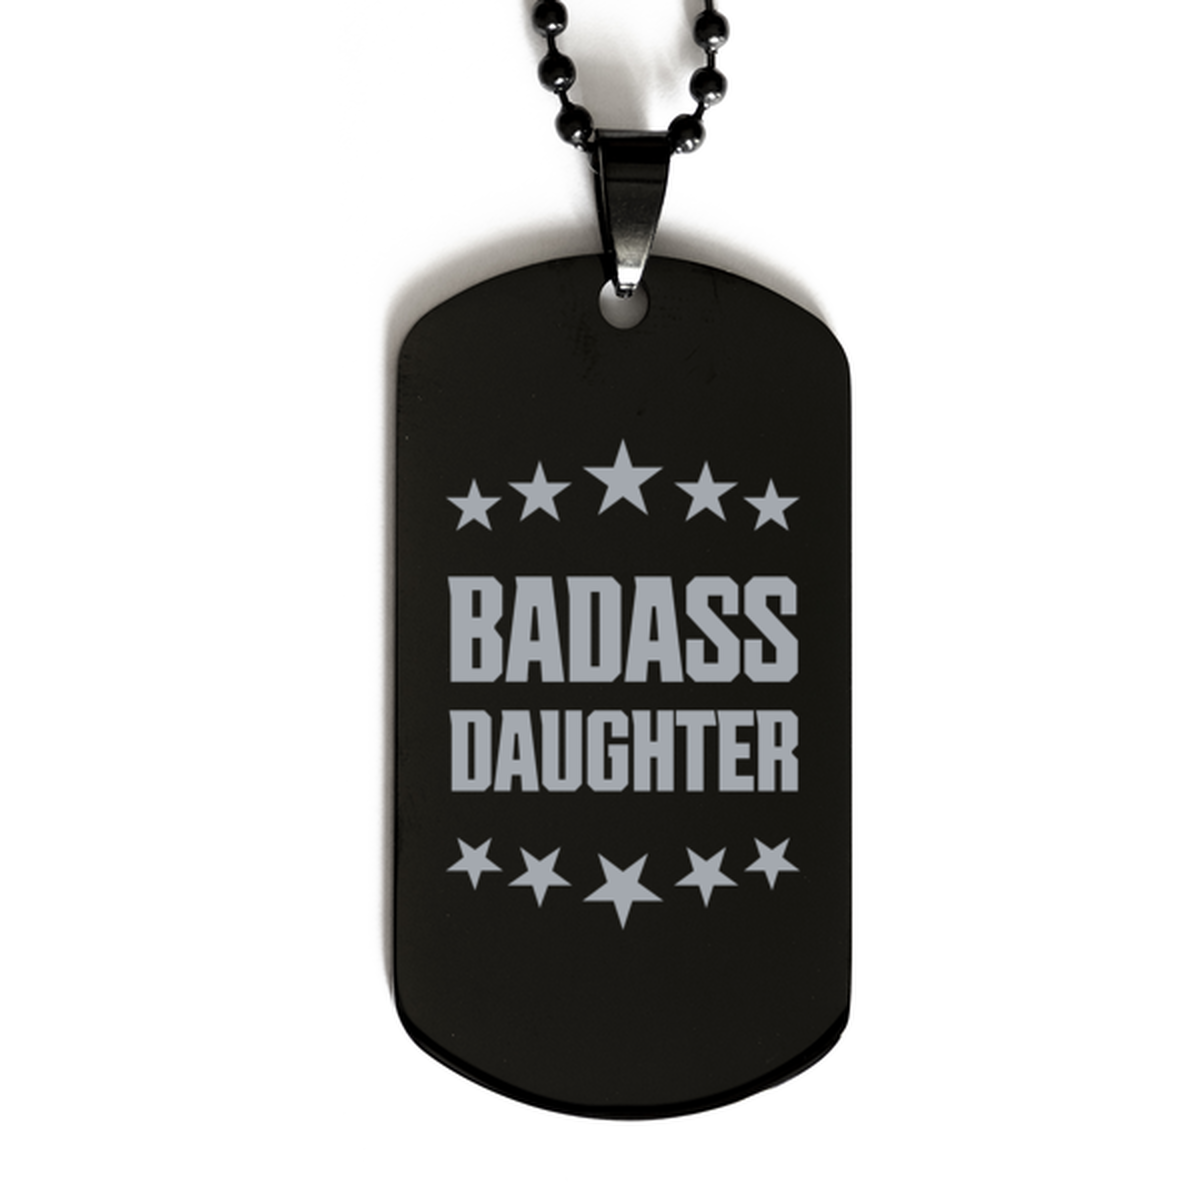 Daughter Black Dog Tag, Badass Daughter, Funny Family Gifts  Necklace For Daughter From Mom Dad